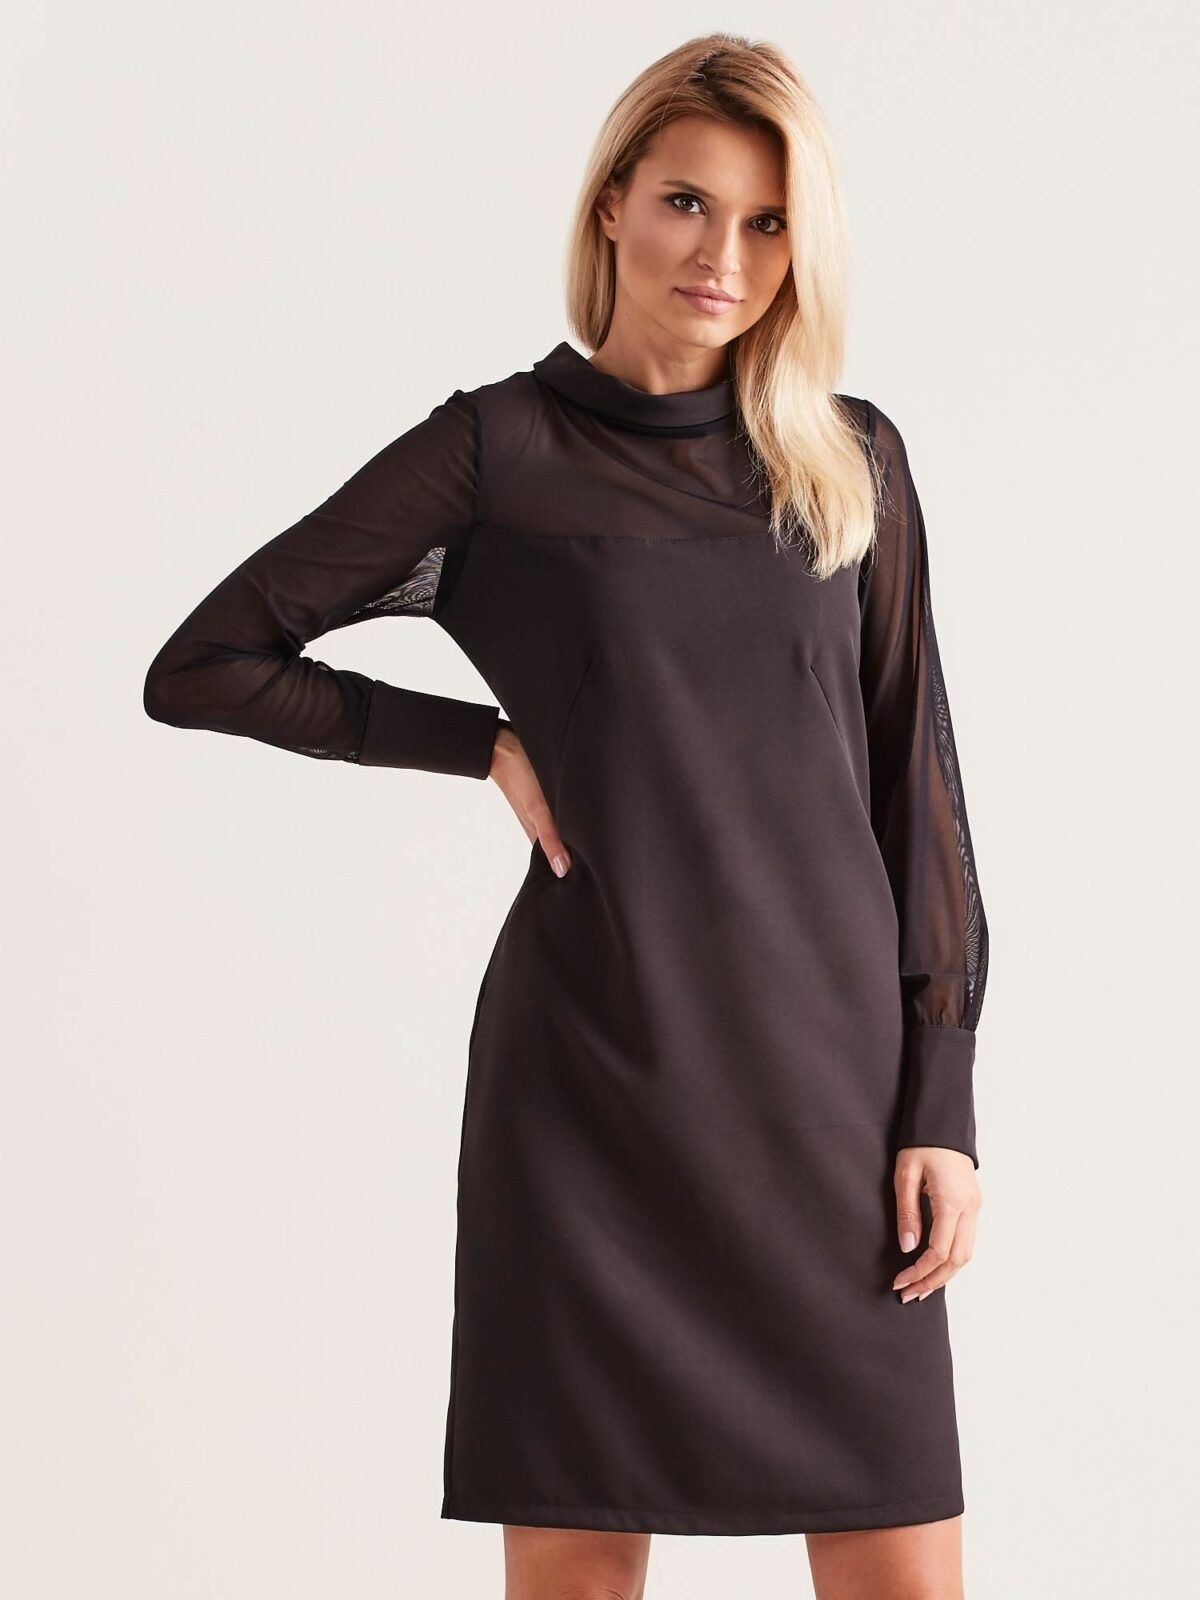 Black dress with long